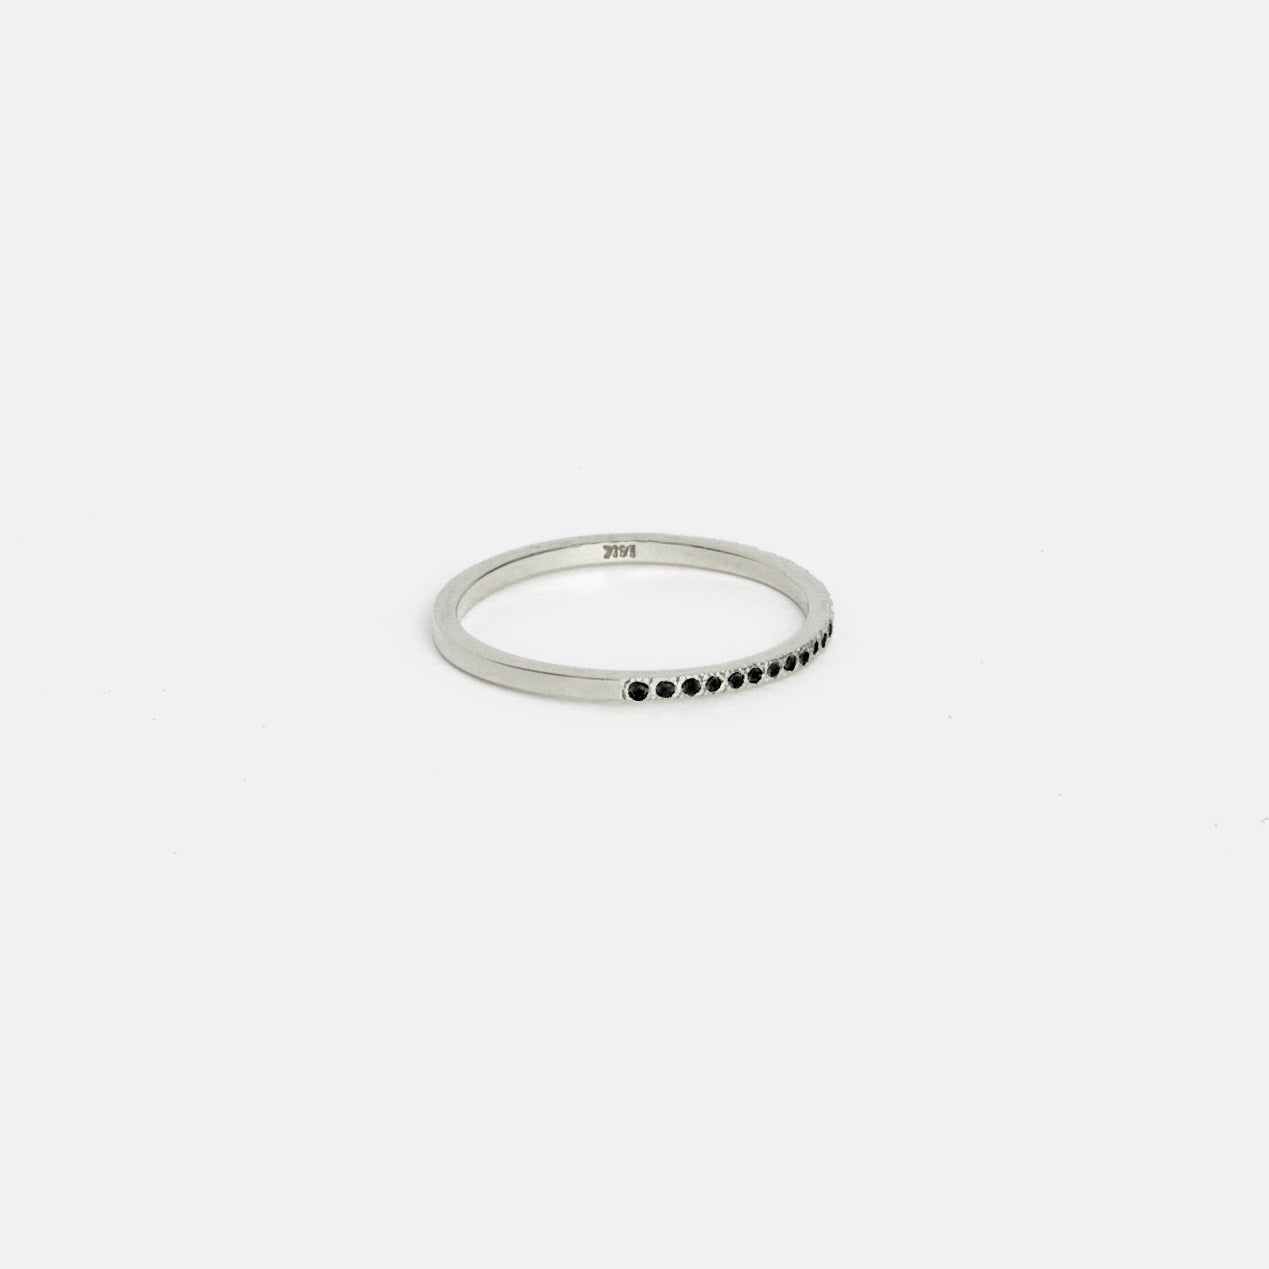 Eile Designer Ring in 14k White Gold set with Black Diamonds By SHW Fine Jewelry NYC